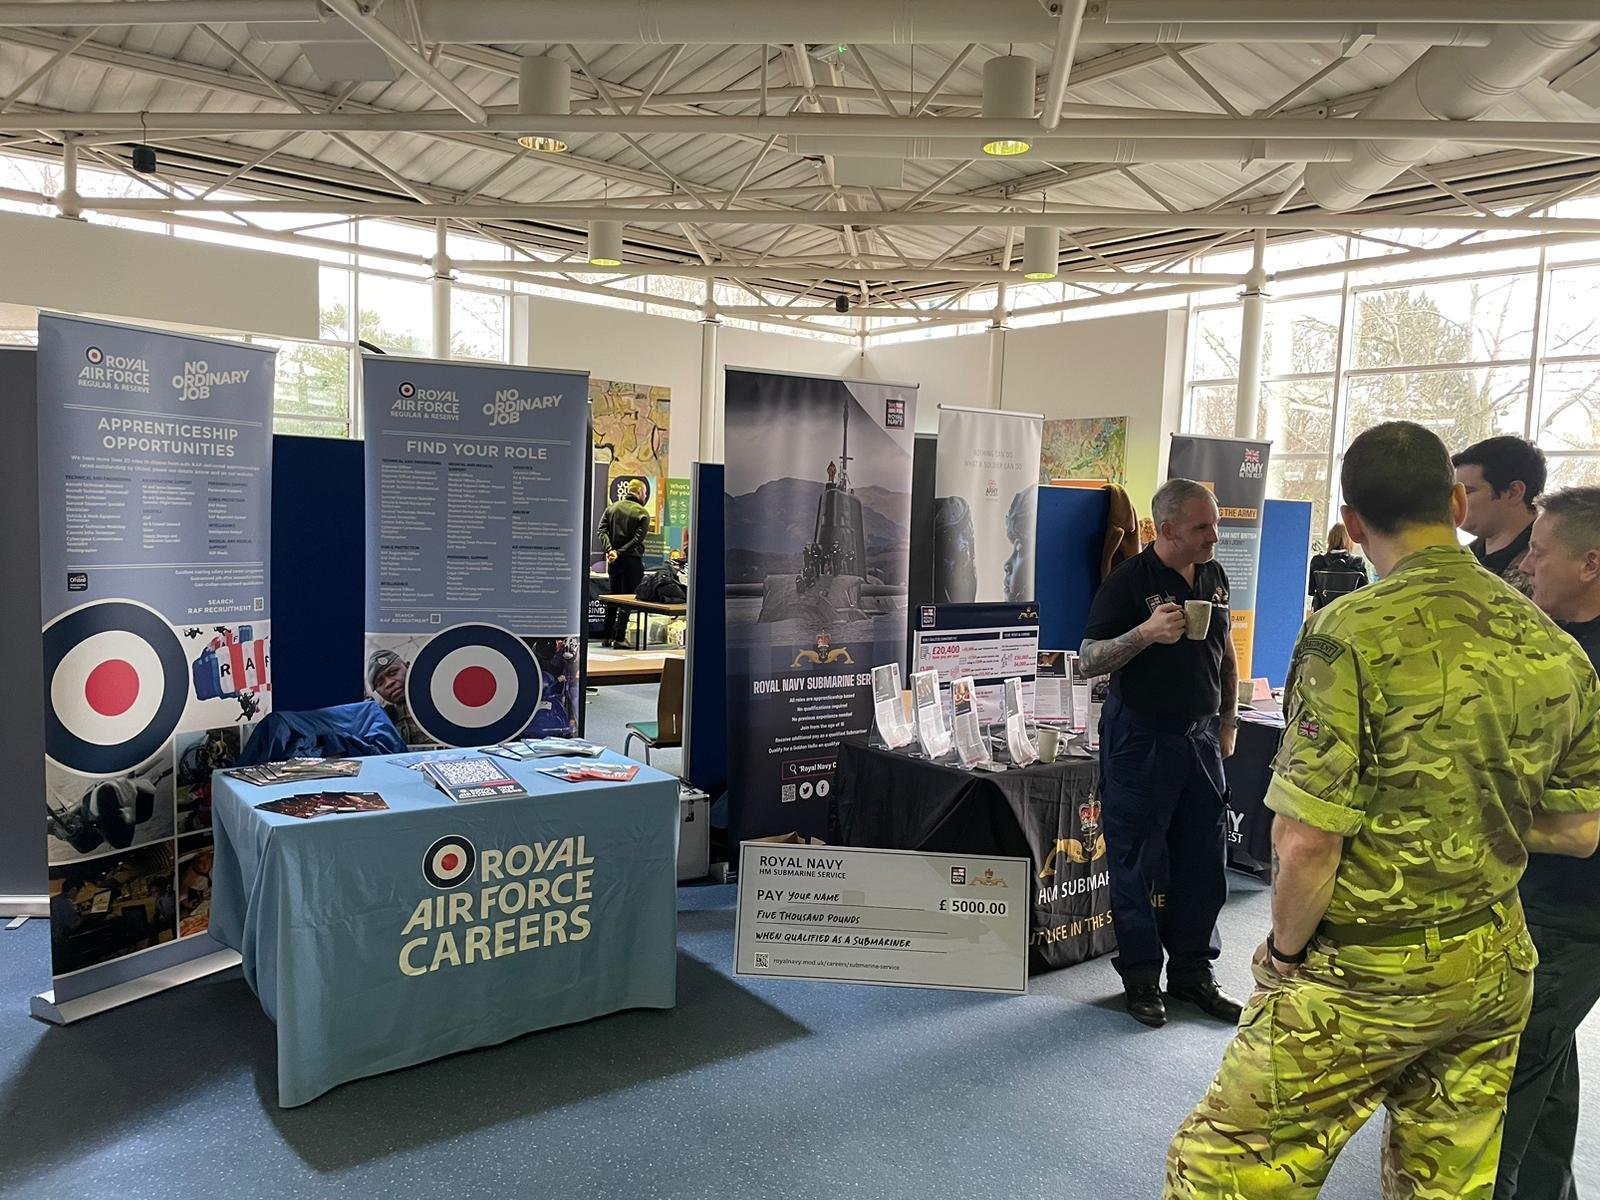 Royal Air Force also in attendance at HOP Generation Welwyn &amp; Hatfield Careers Fair